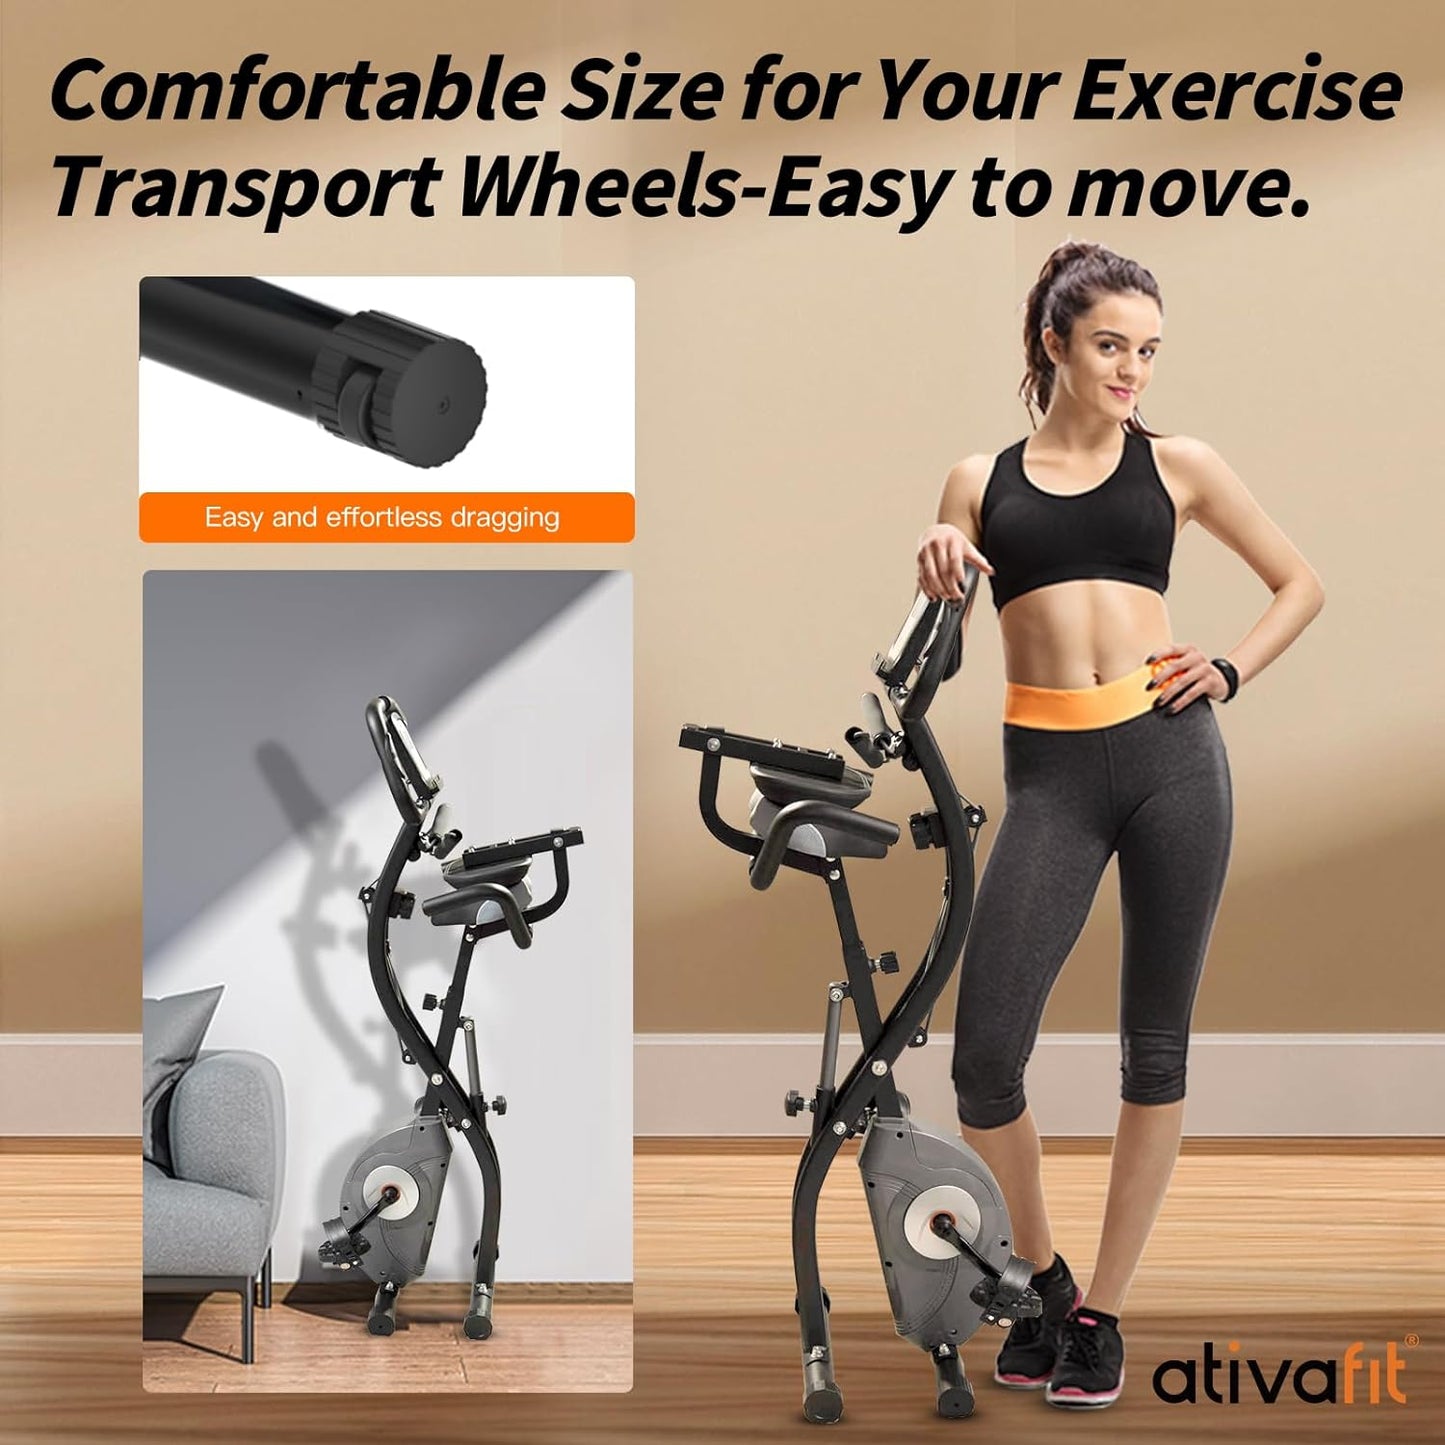 Folding Exercise Bike, Magnetic Foldable Stationary Bike, Indoor Cycling Exercise Bike for Home Workout